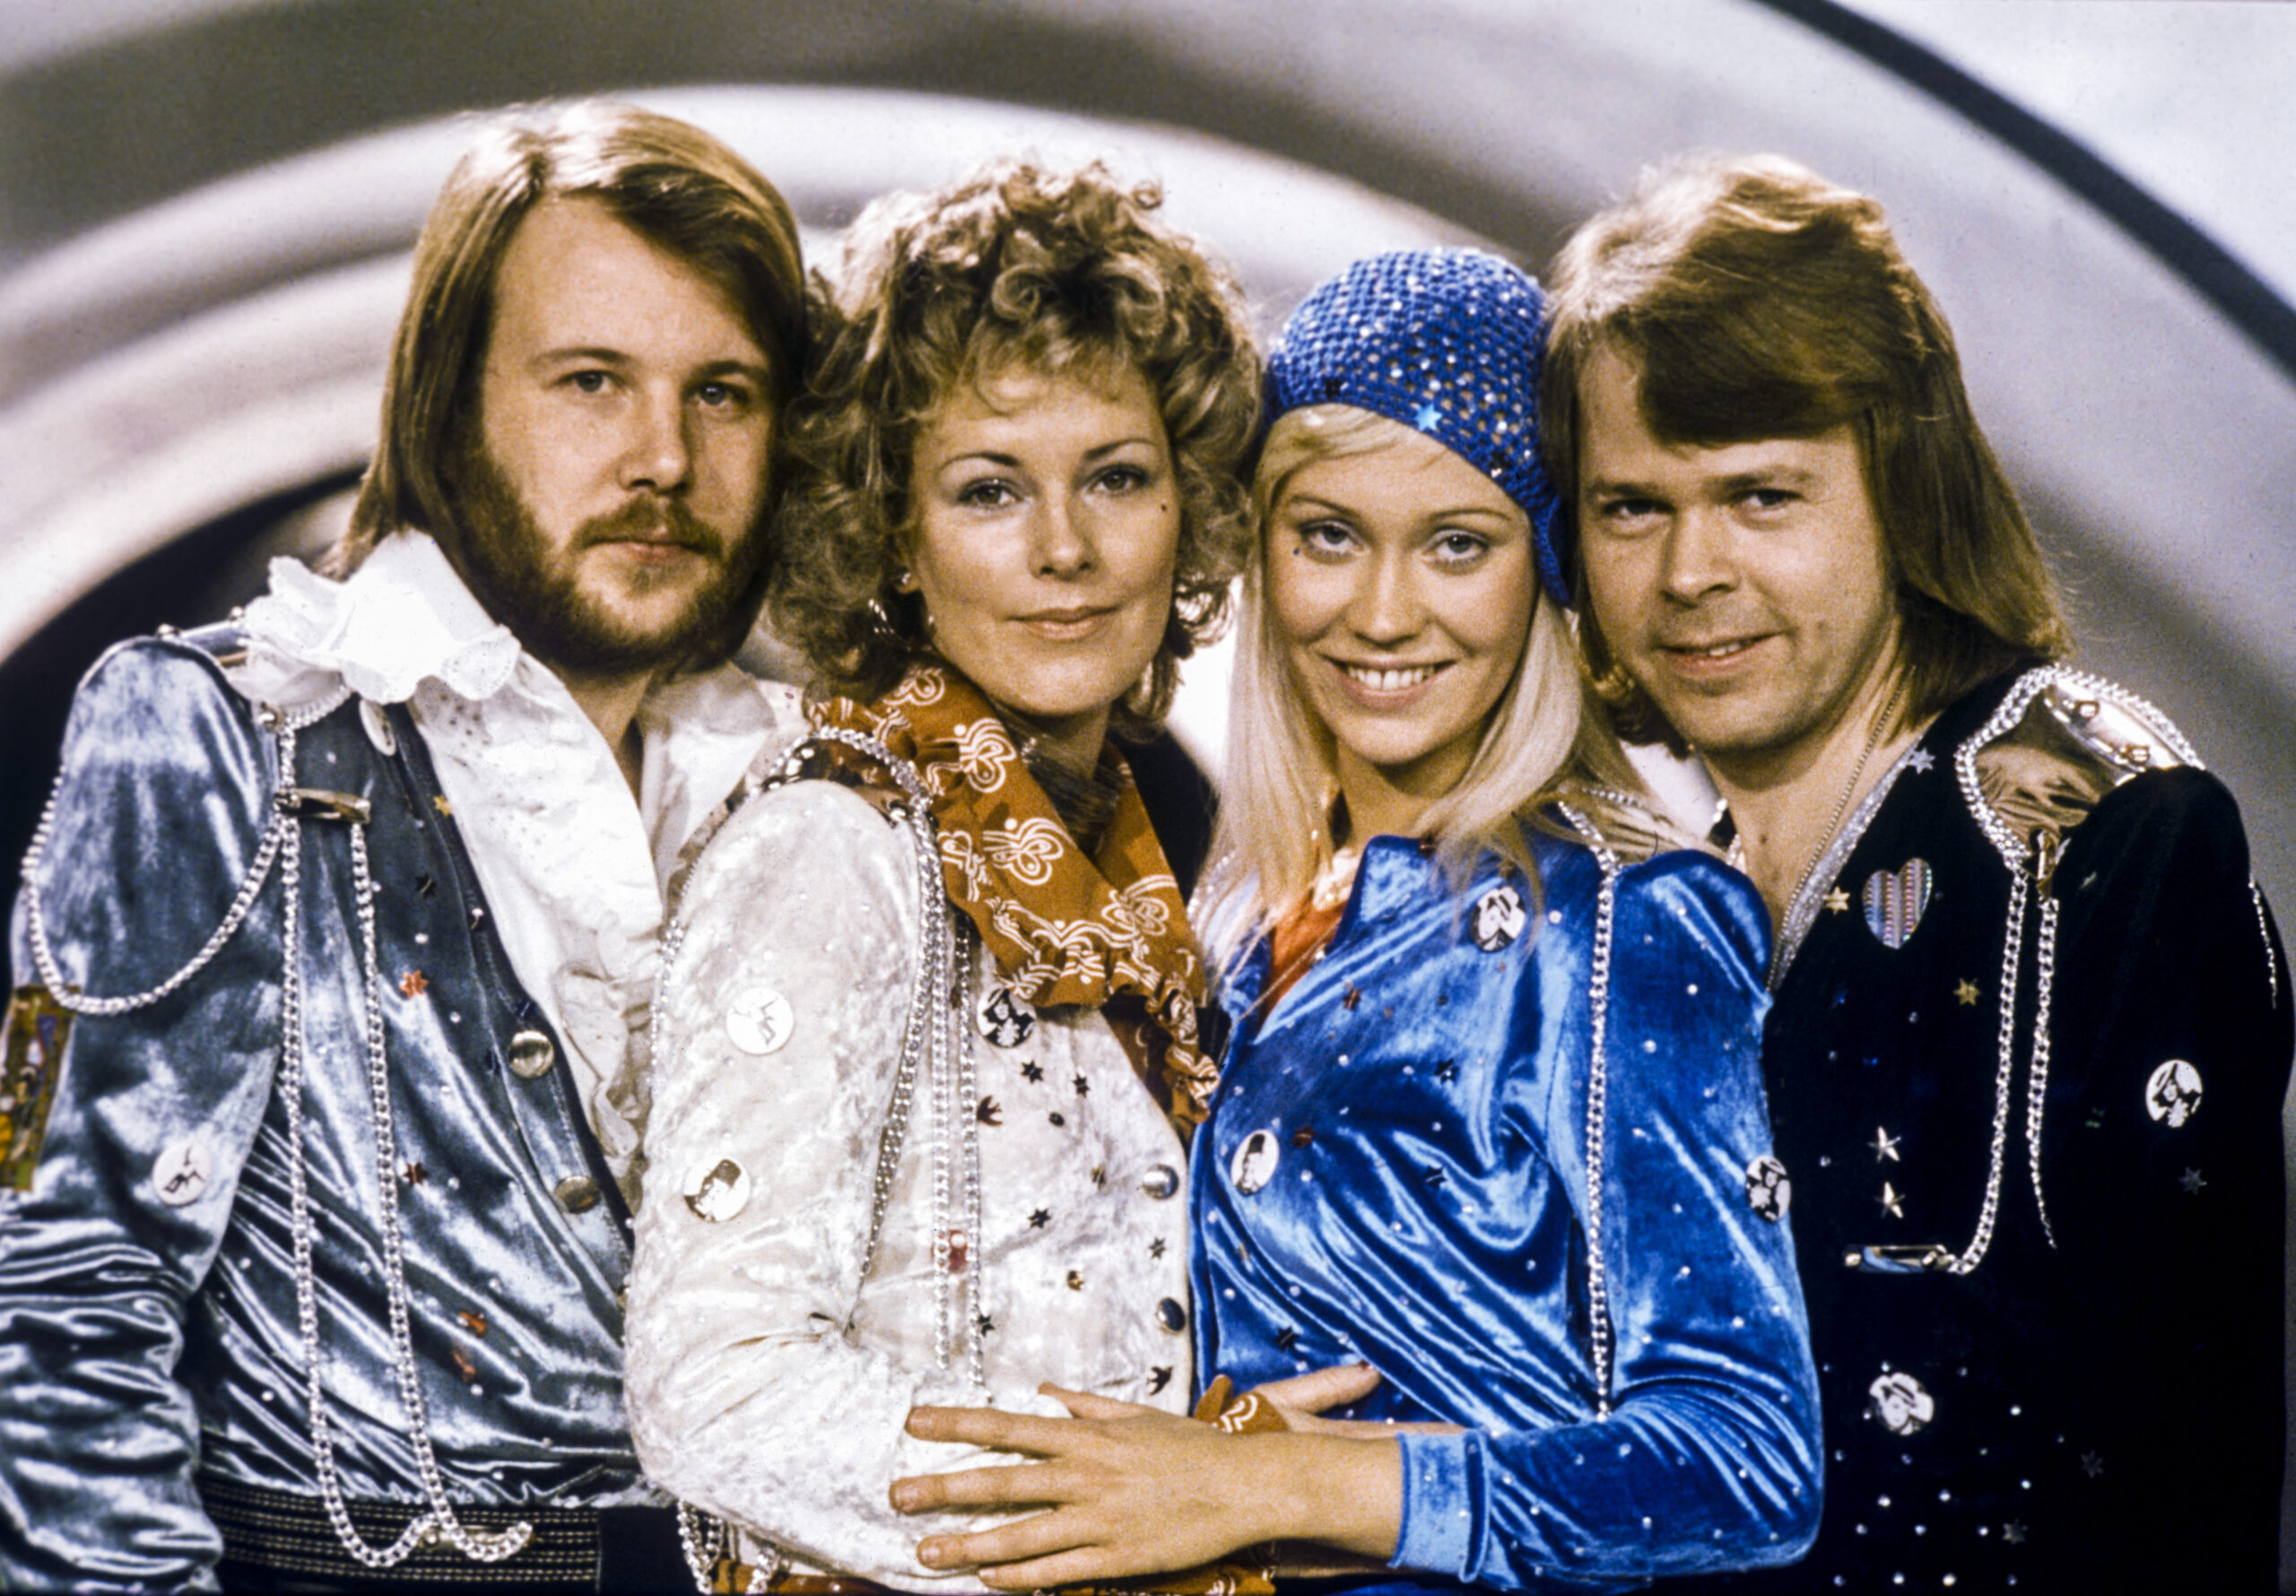 Picture taken in 1974 in Stockholm shows the Swedish pop group Abba with its members (from left) Benny Andersson, Anni-Frid Lyngstad, Agnetha Faltskog and Bjorn Ulvaeus posing after winning the Swedish branch of the Eurovision Song Contest with their song "Waterloo." Image: Olle Lindeborg/TT News Agency via AFP